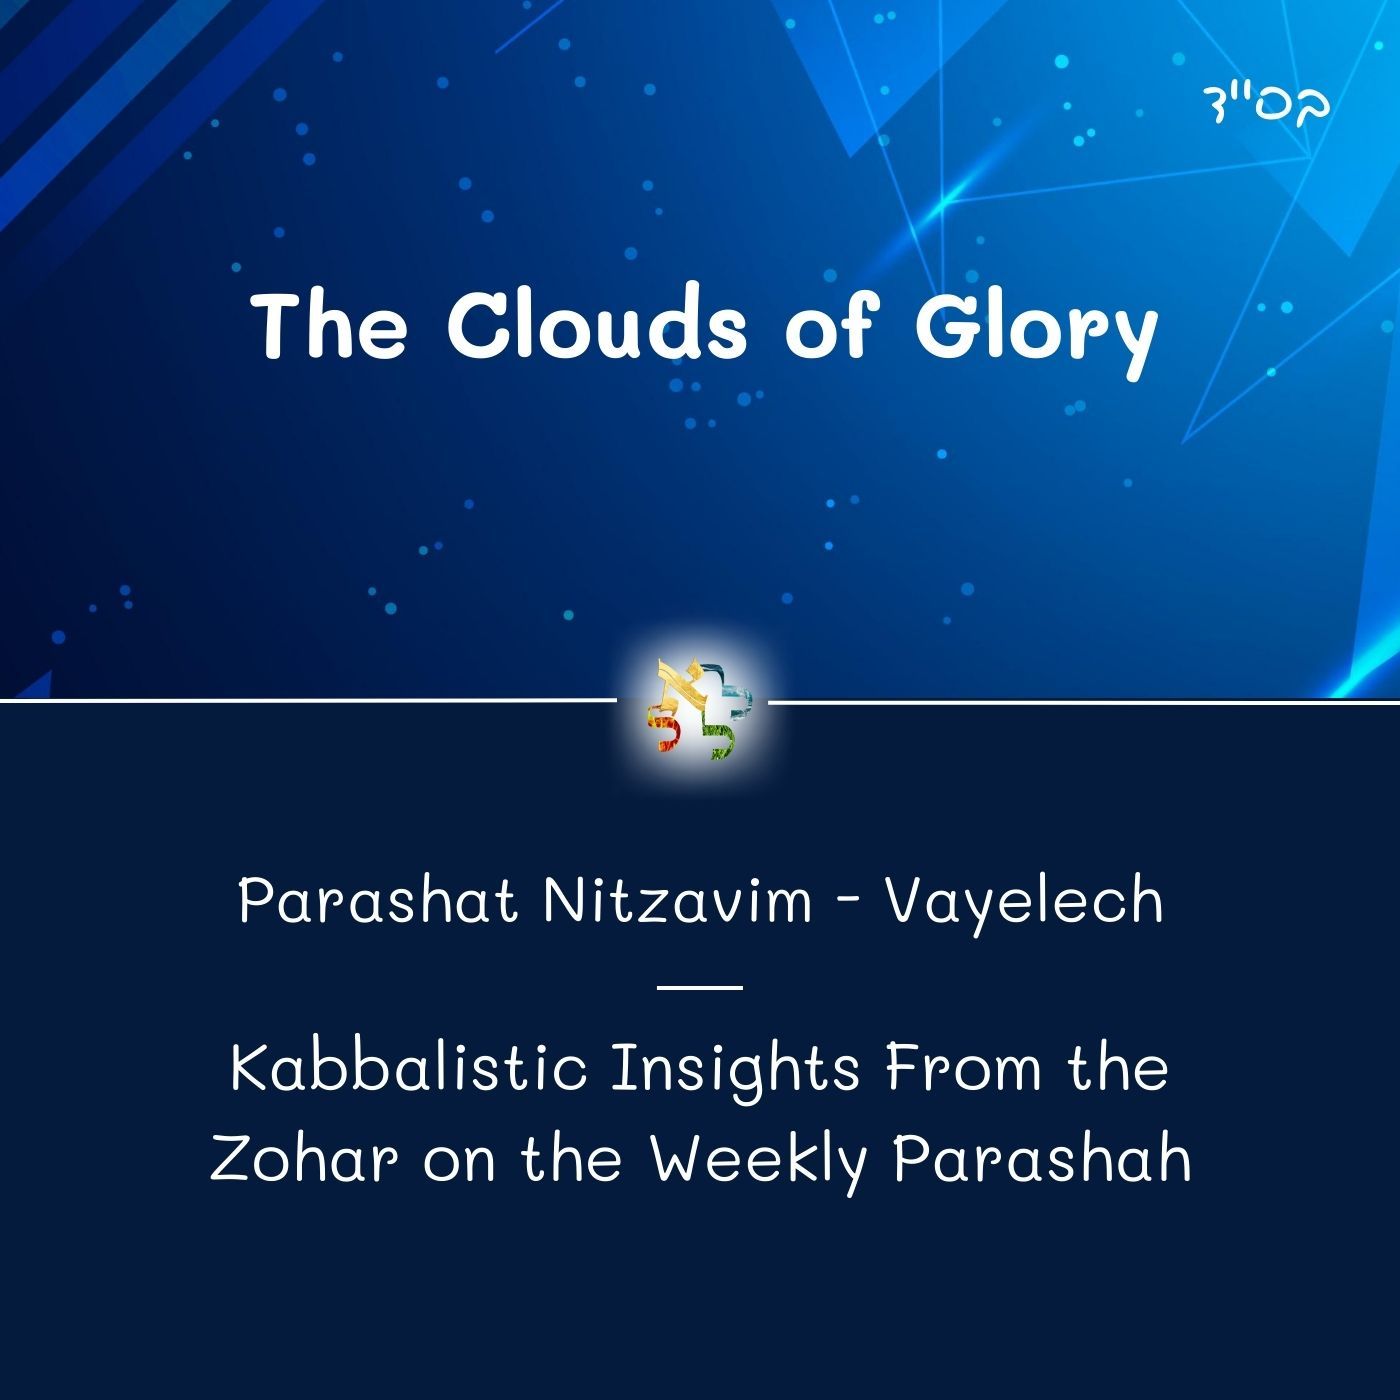 The Clouds of Glory - Kabbalistic Inspiration on the Parasha